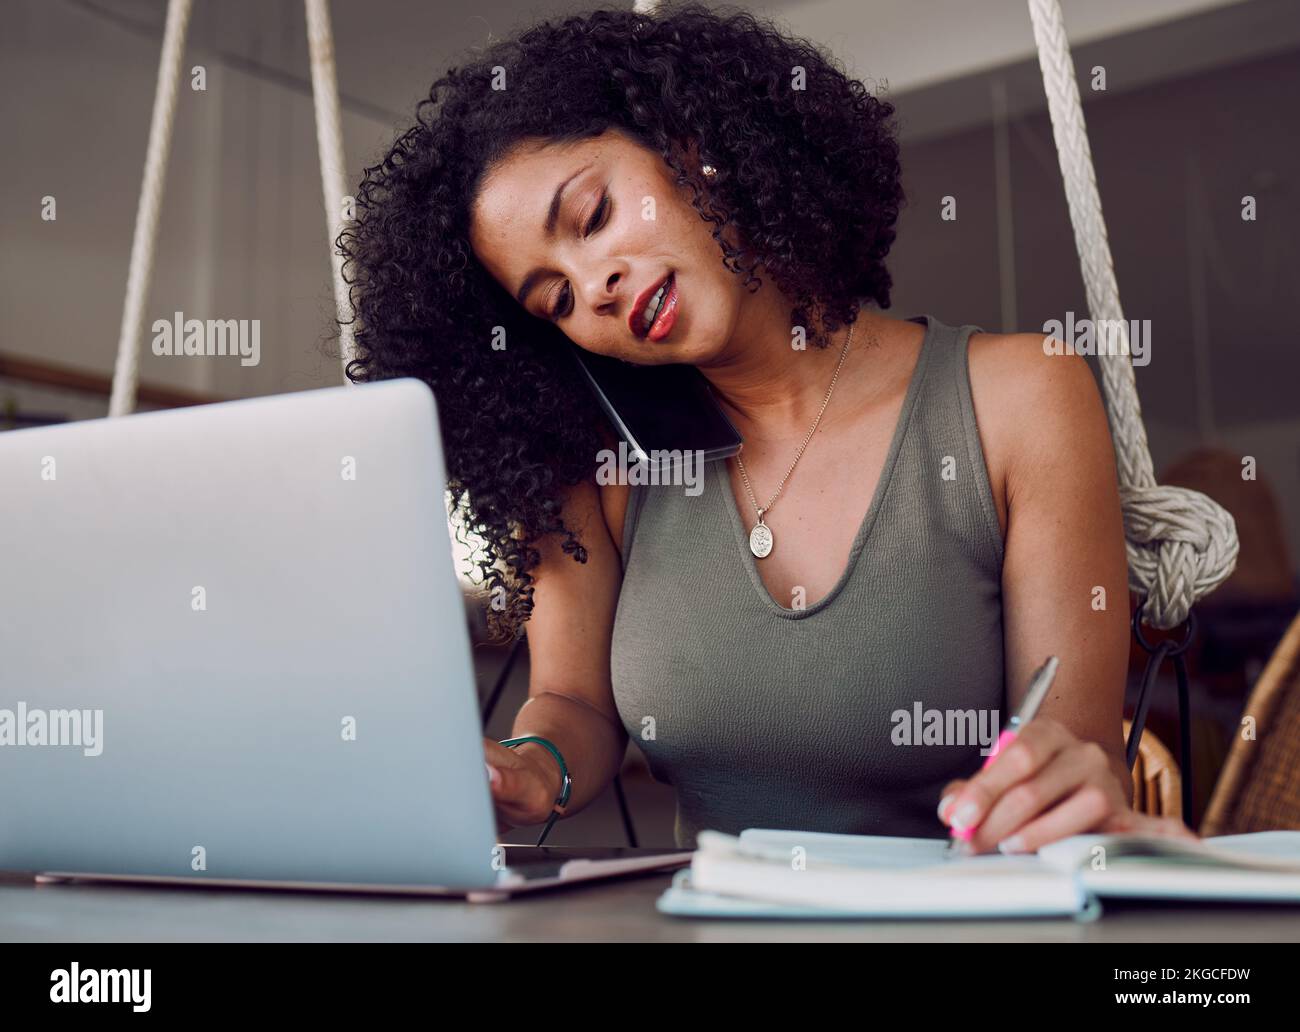 Laptop, phone call and black woman writing in notebook, multitasking and working in cafe. Freelancer, tech and female remote worker with computer Stock Photo